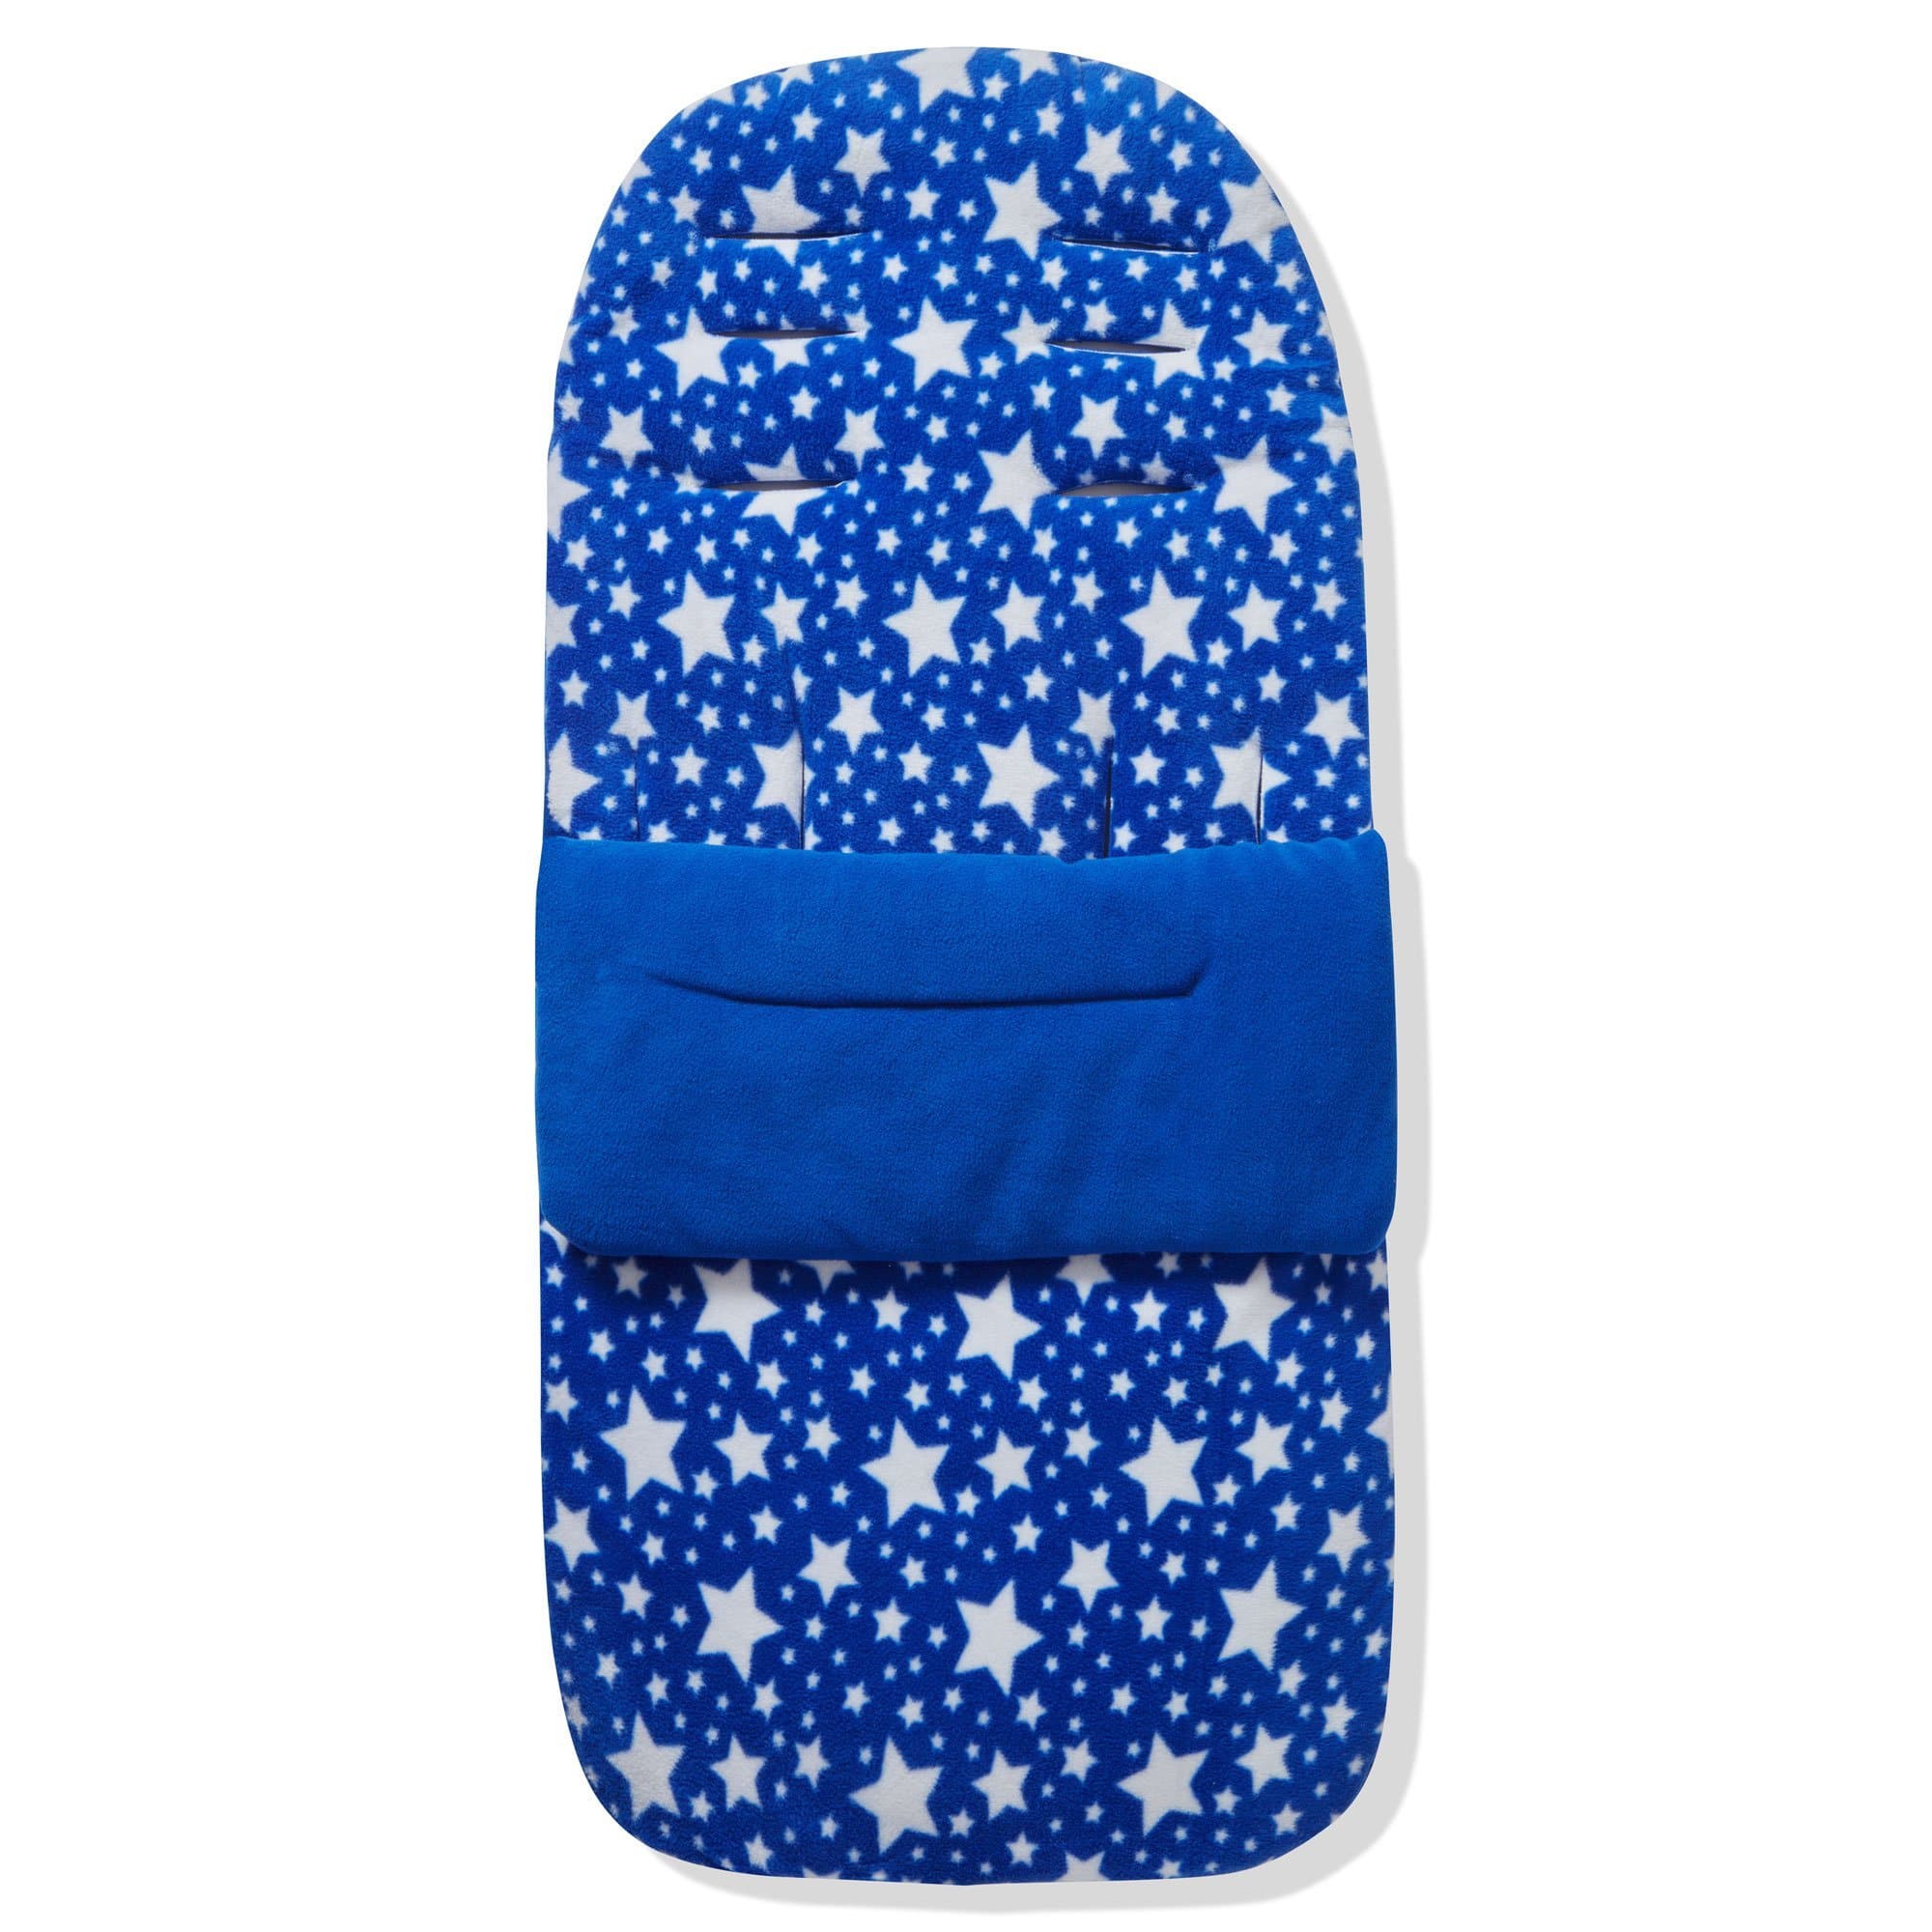 Fleece Footmuff / Cosy Toes Compatible with Kids Kargo - Blue Star / Fits All Models | For Your Little One